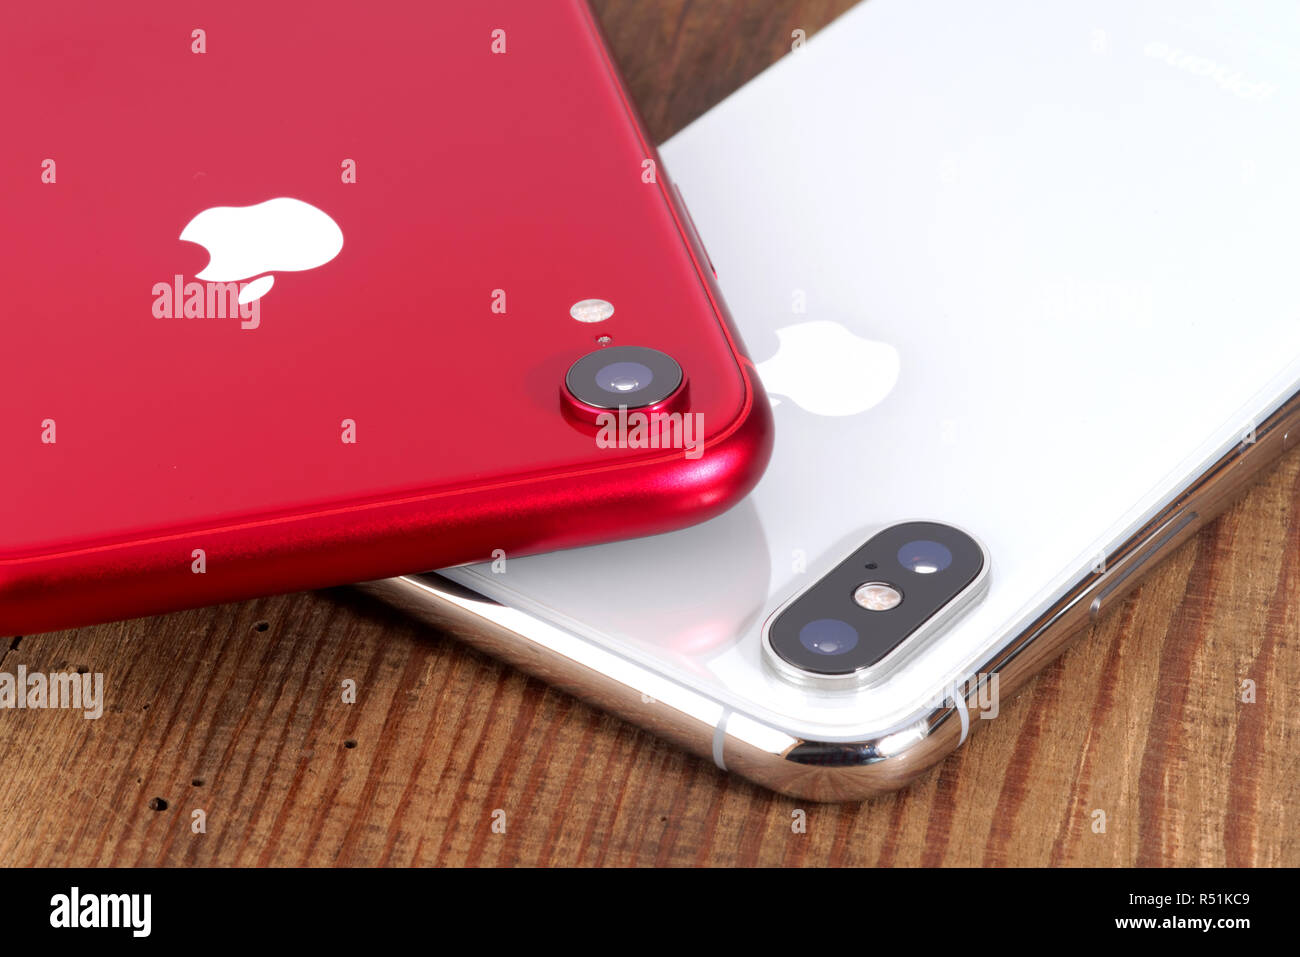 Koszalin, Poland – November 29, 2018: Silver iPhone Xs and red iPhone XR. The iPhone Xs and iPhone XR is smart phone with multi touch screen produced Stock Photo